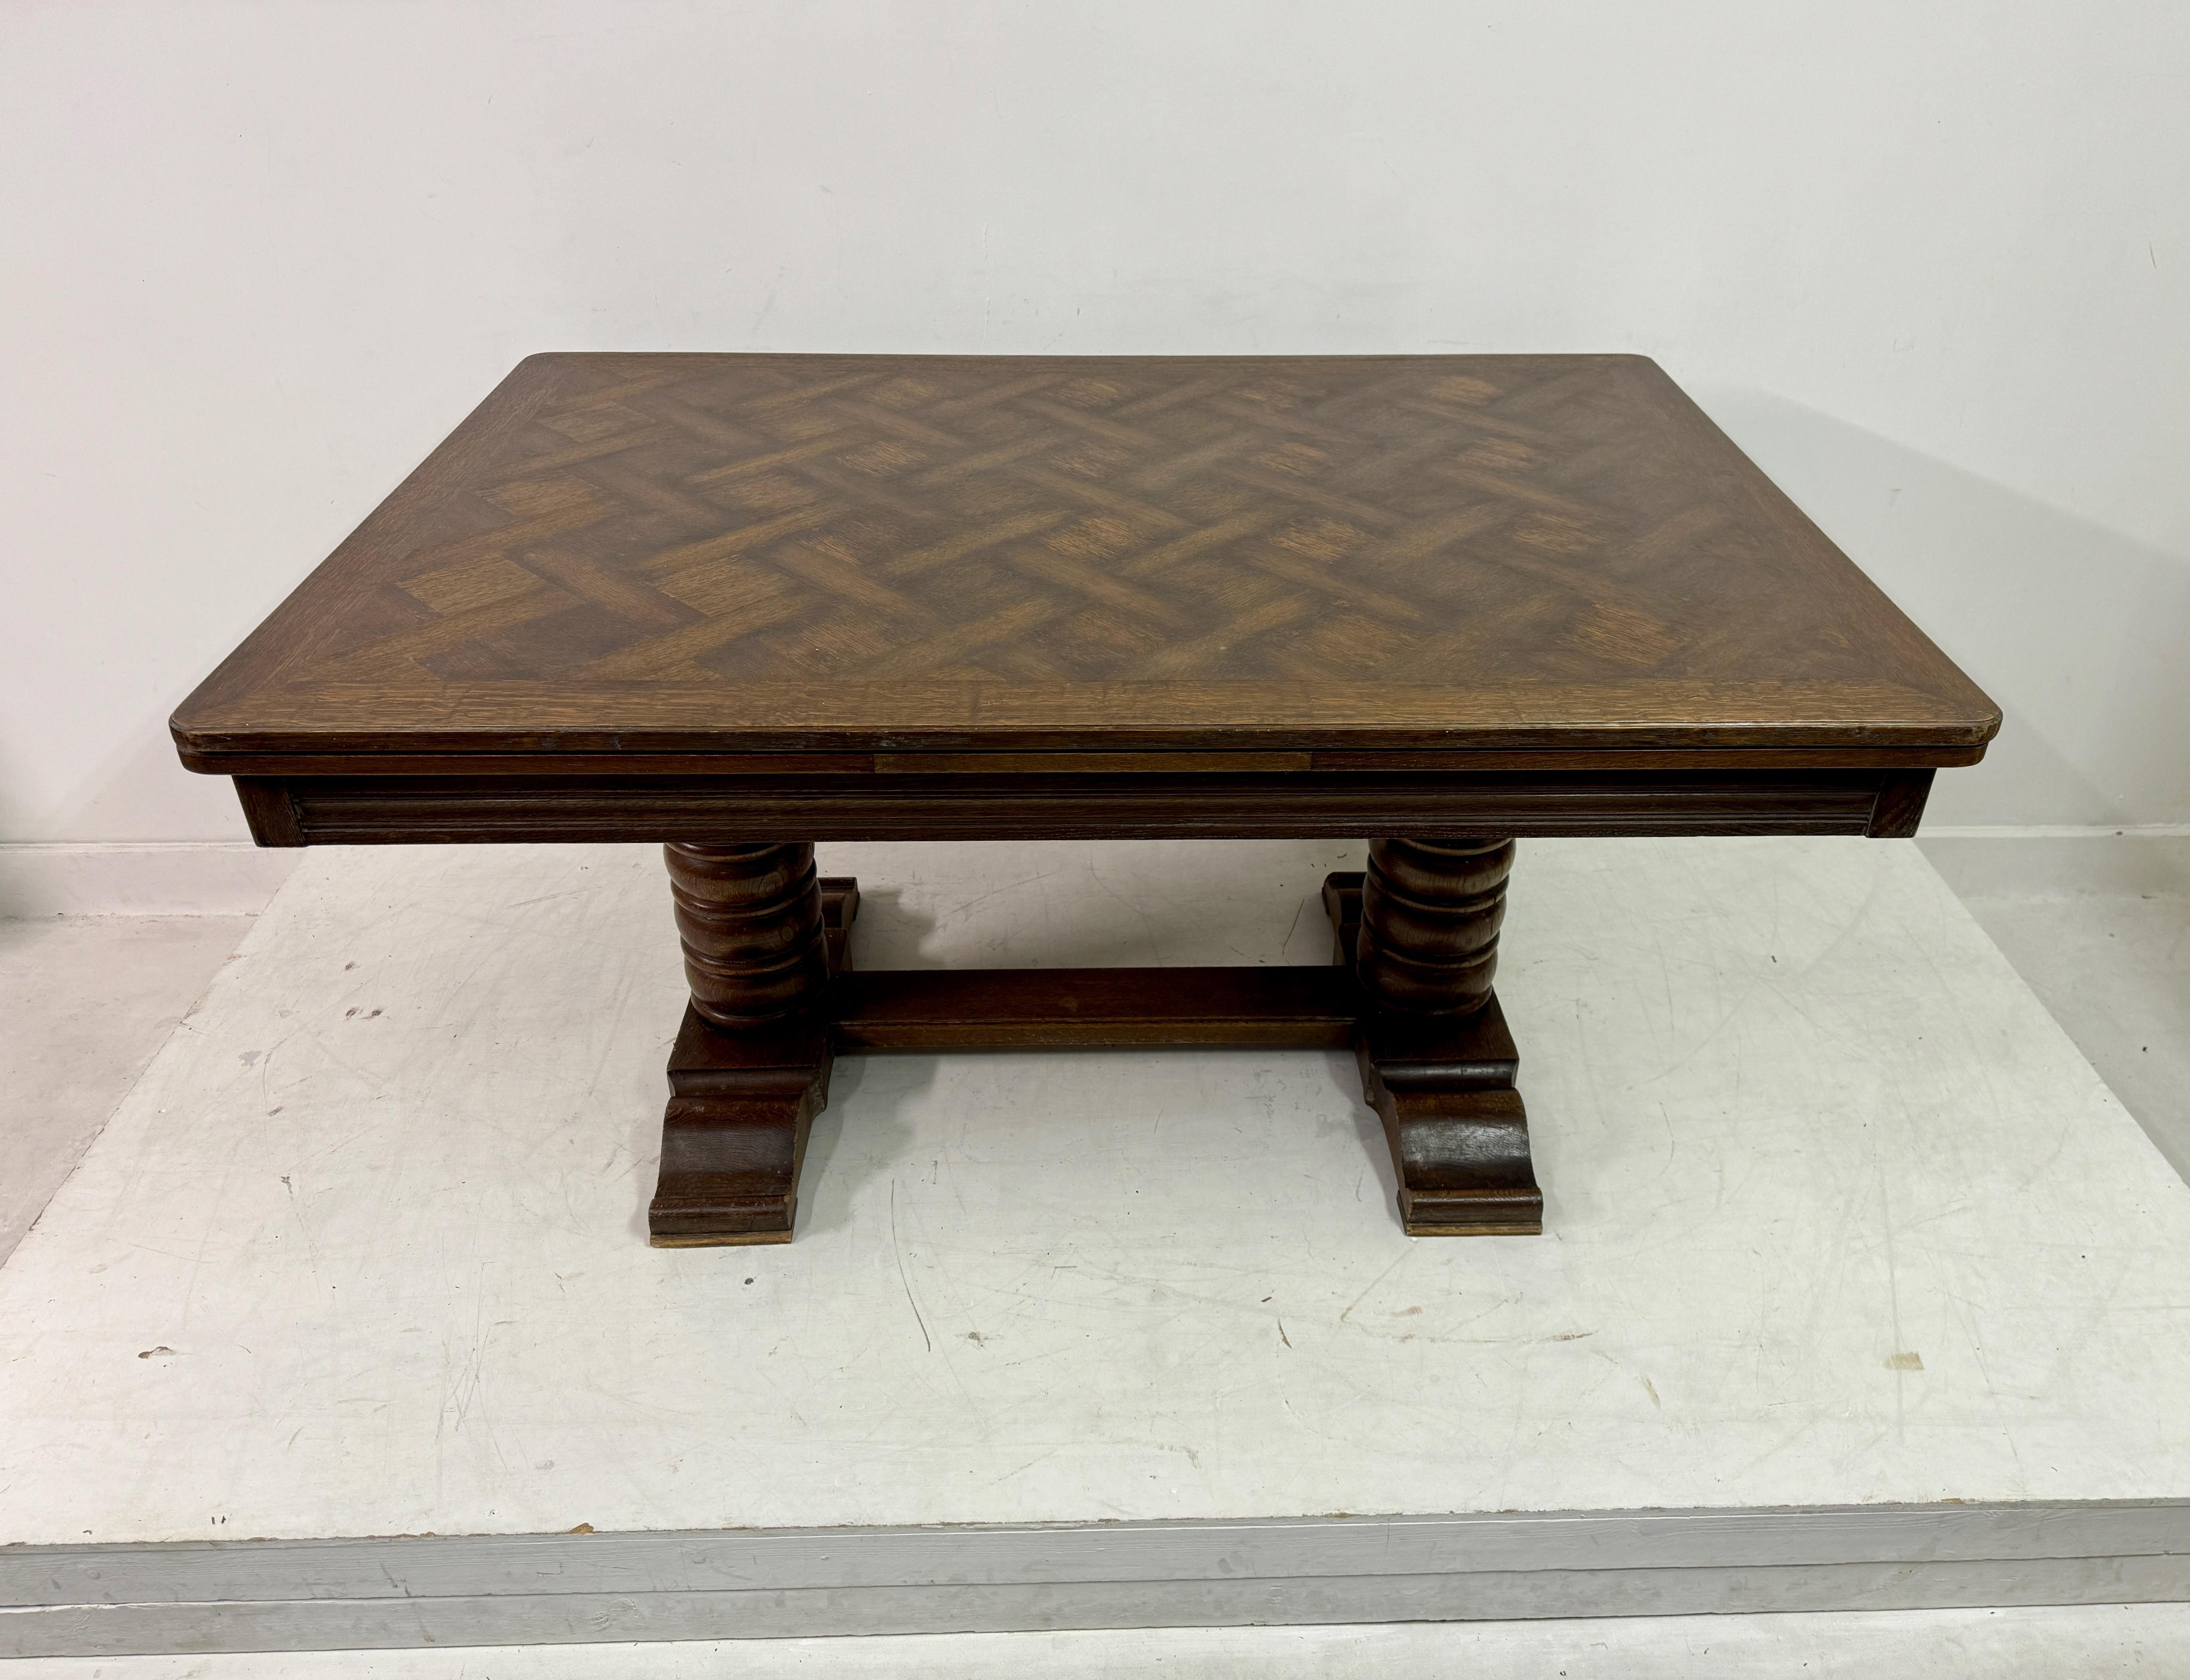 1930s French Oak Extending Dining Table With Turned Bobbin Legs In Good Condition For Sale In London, London